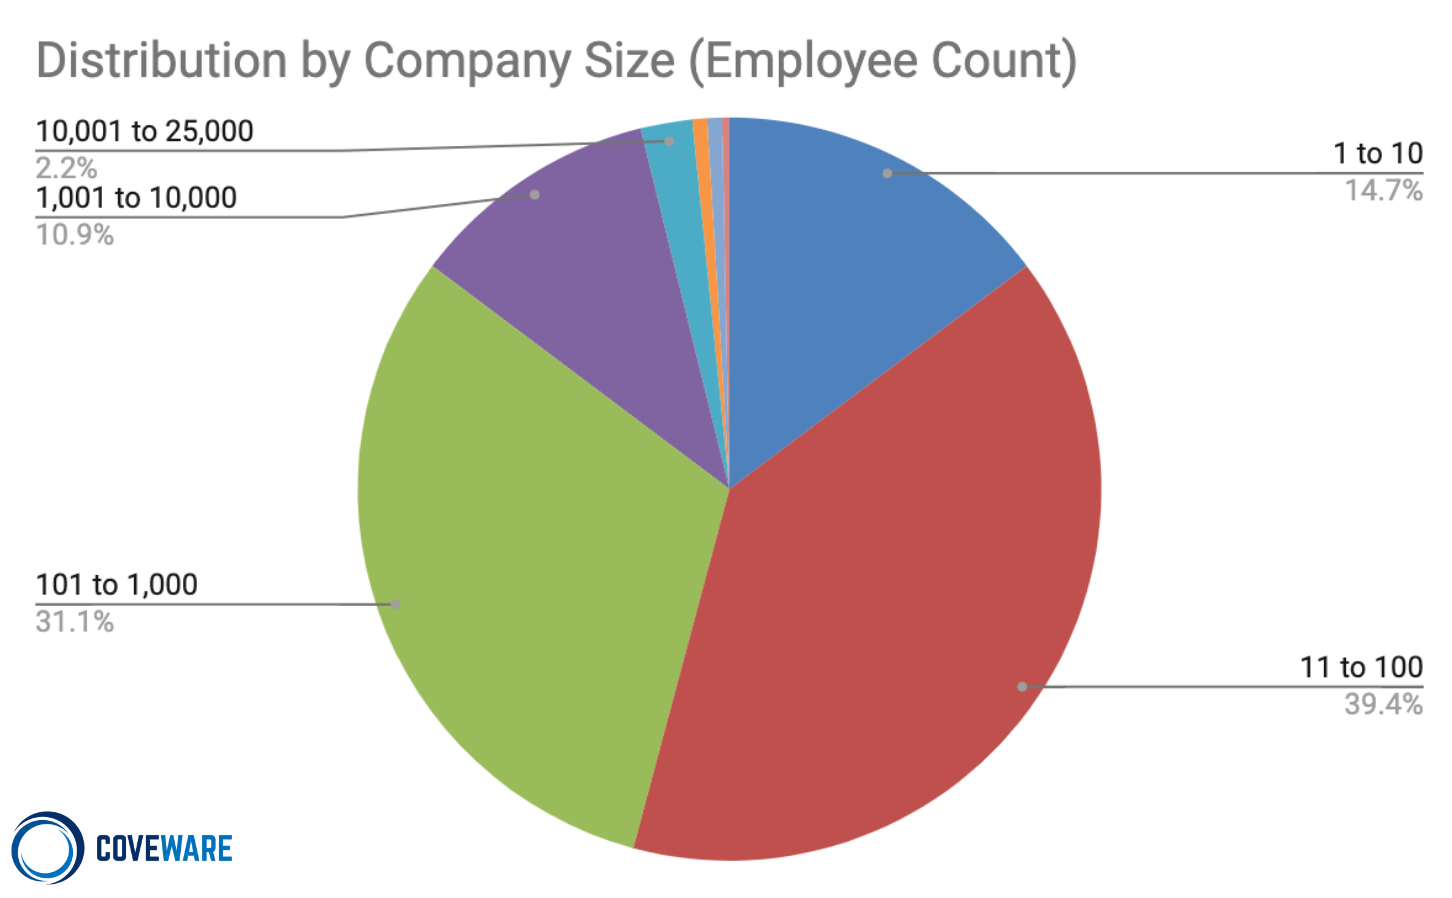 Company size by employee count